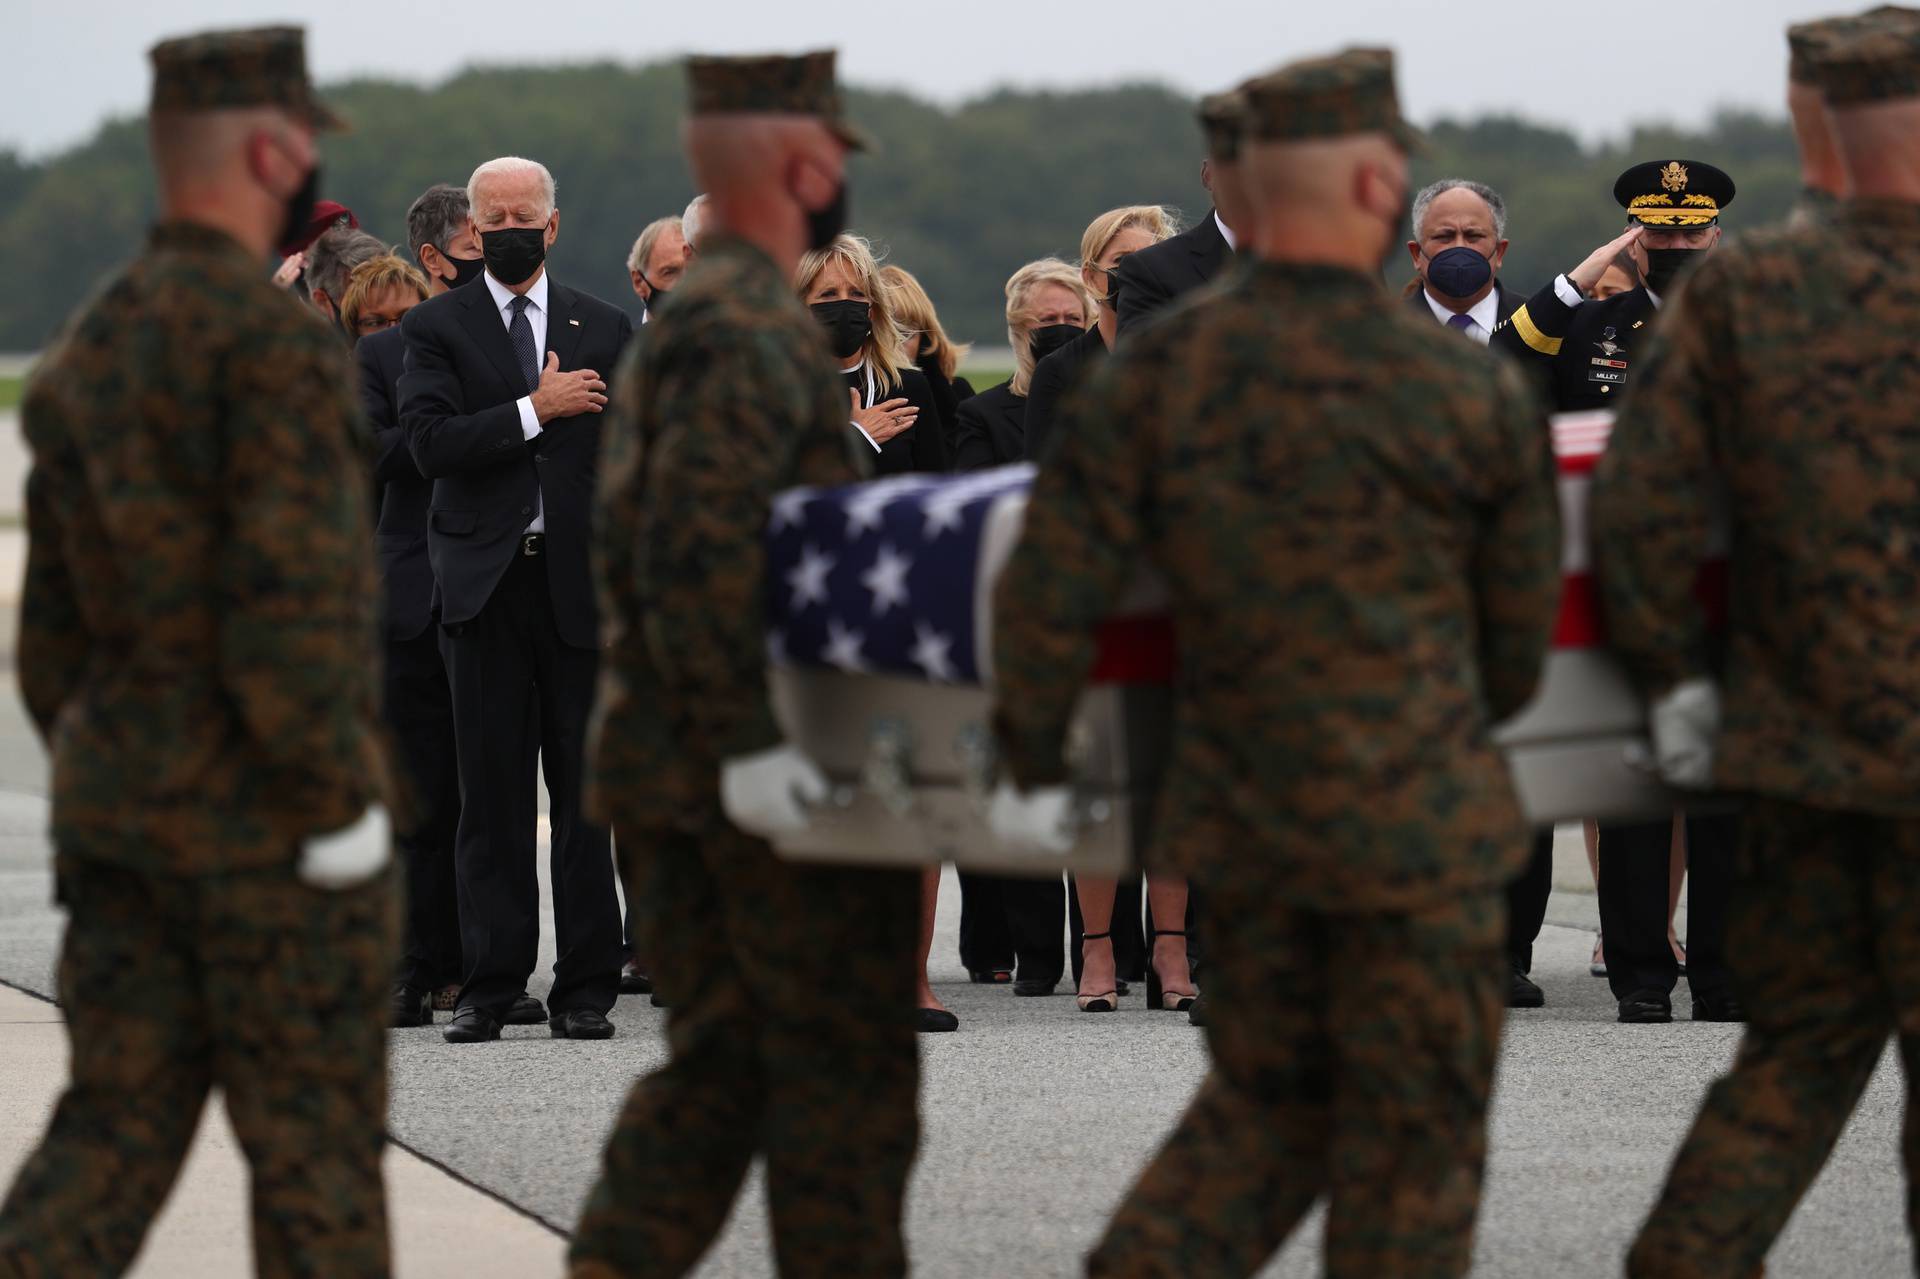 U.S. President Joe Biden salutes during the dignified transfer of the remains of U.S. Military service members who were killed by a suicide bombing at the Hamid Karzai International Airport